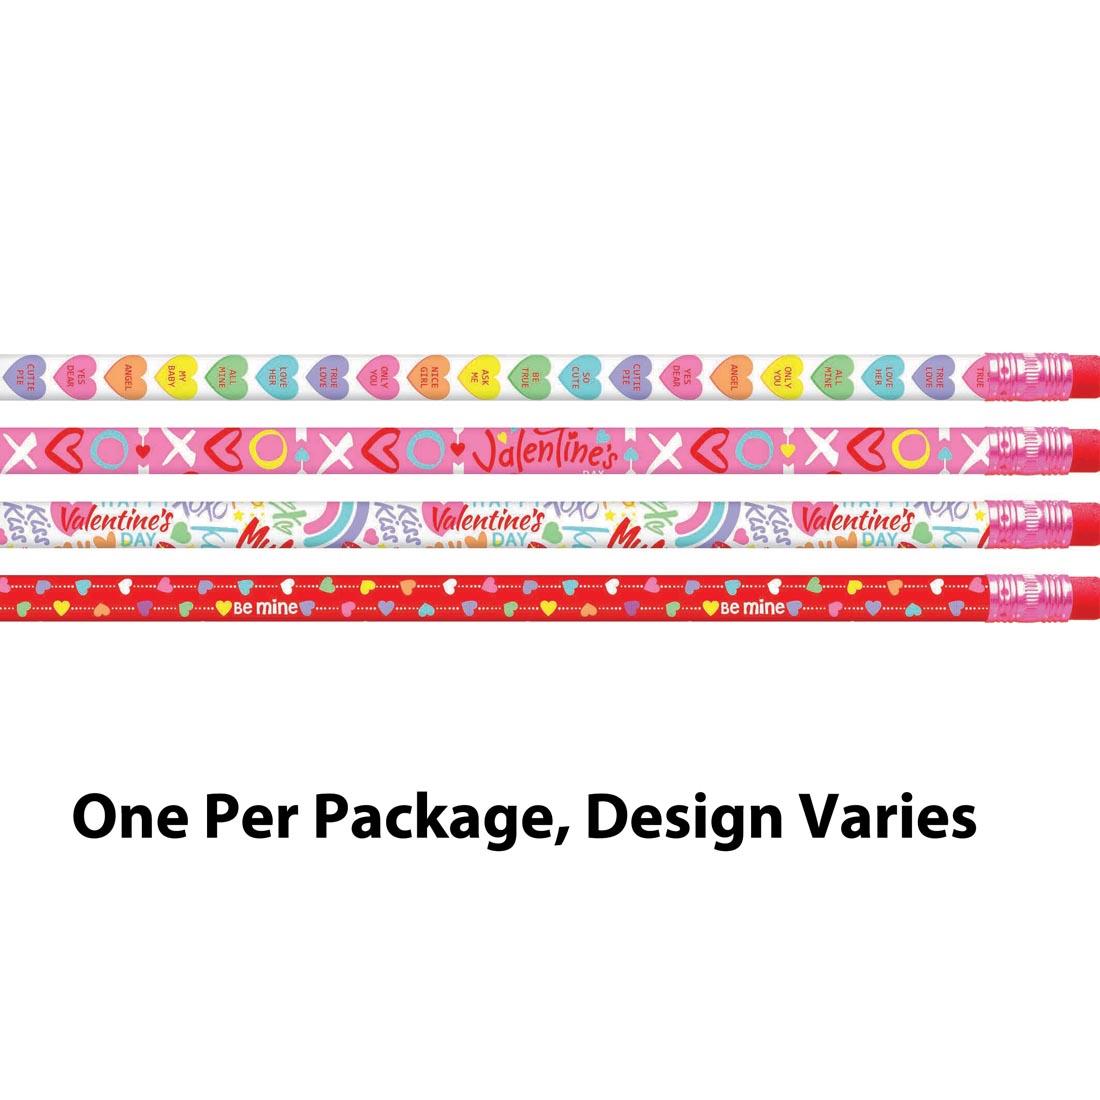 Four Happy Valentine's Day Pencils with the text One Per Package, Design Varies